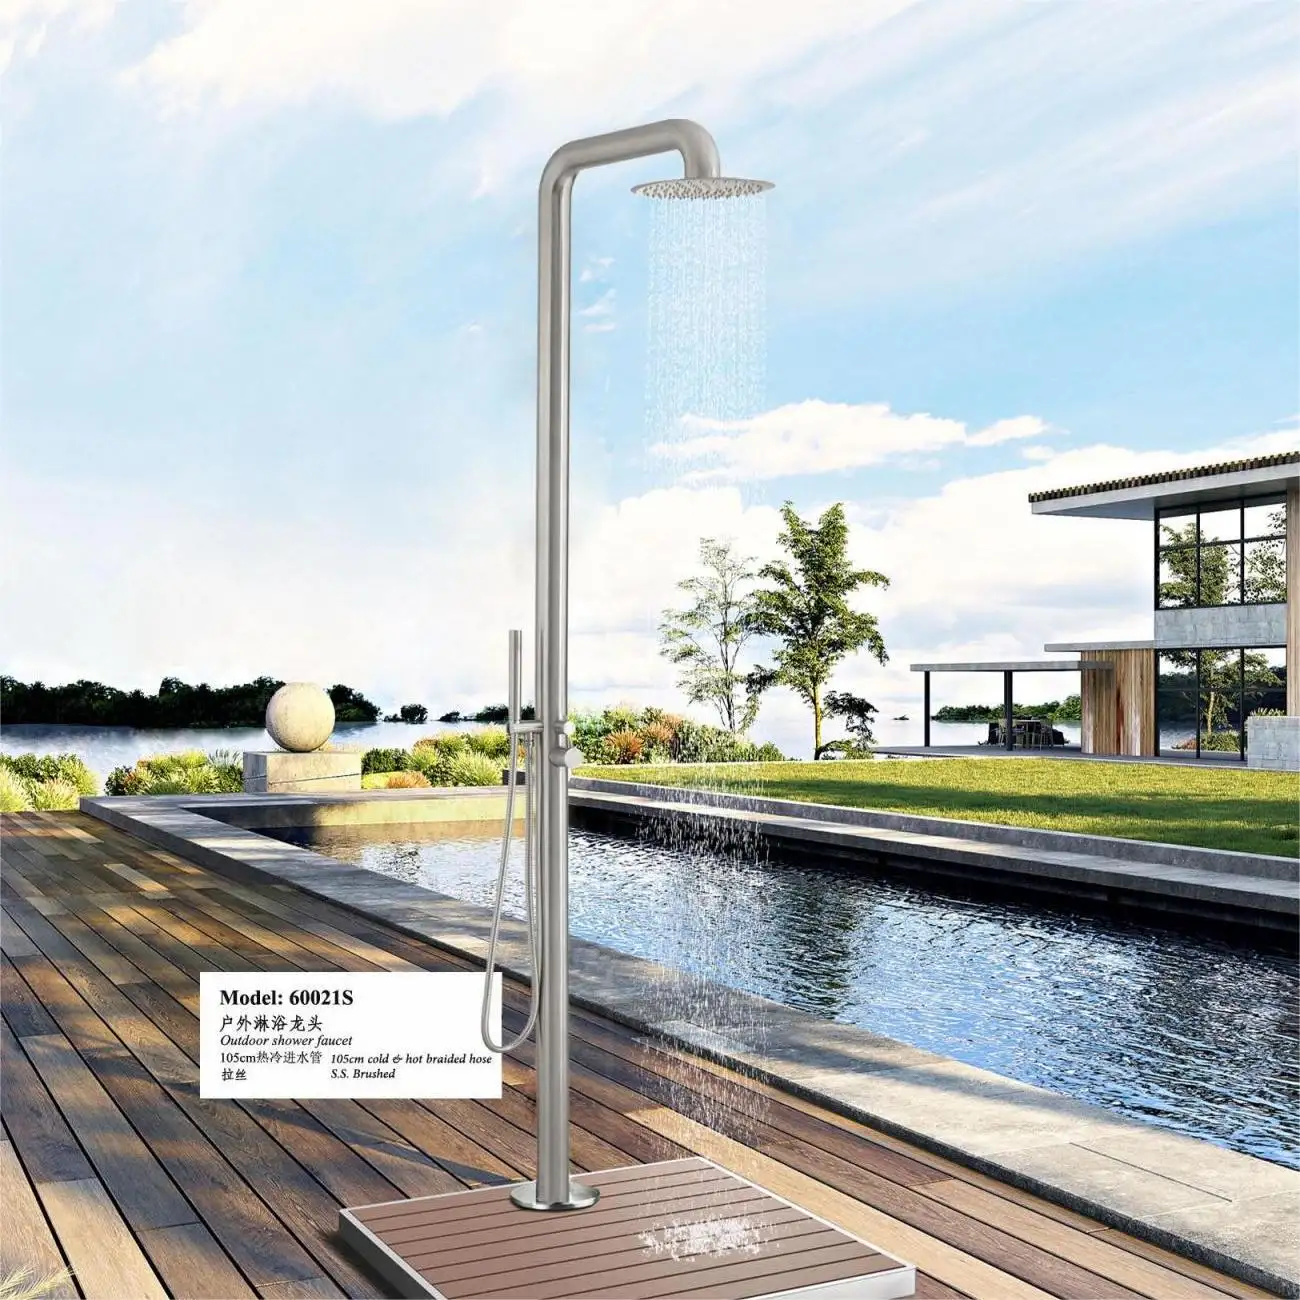 Bath Pressure Garden Beach Stainless Steel Pool Beach Outdoor Shower For Swimming Pool And Garden